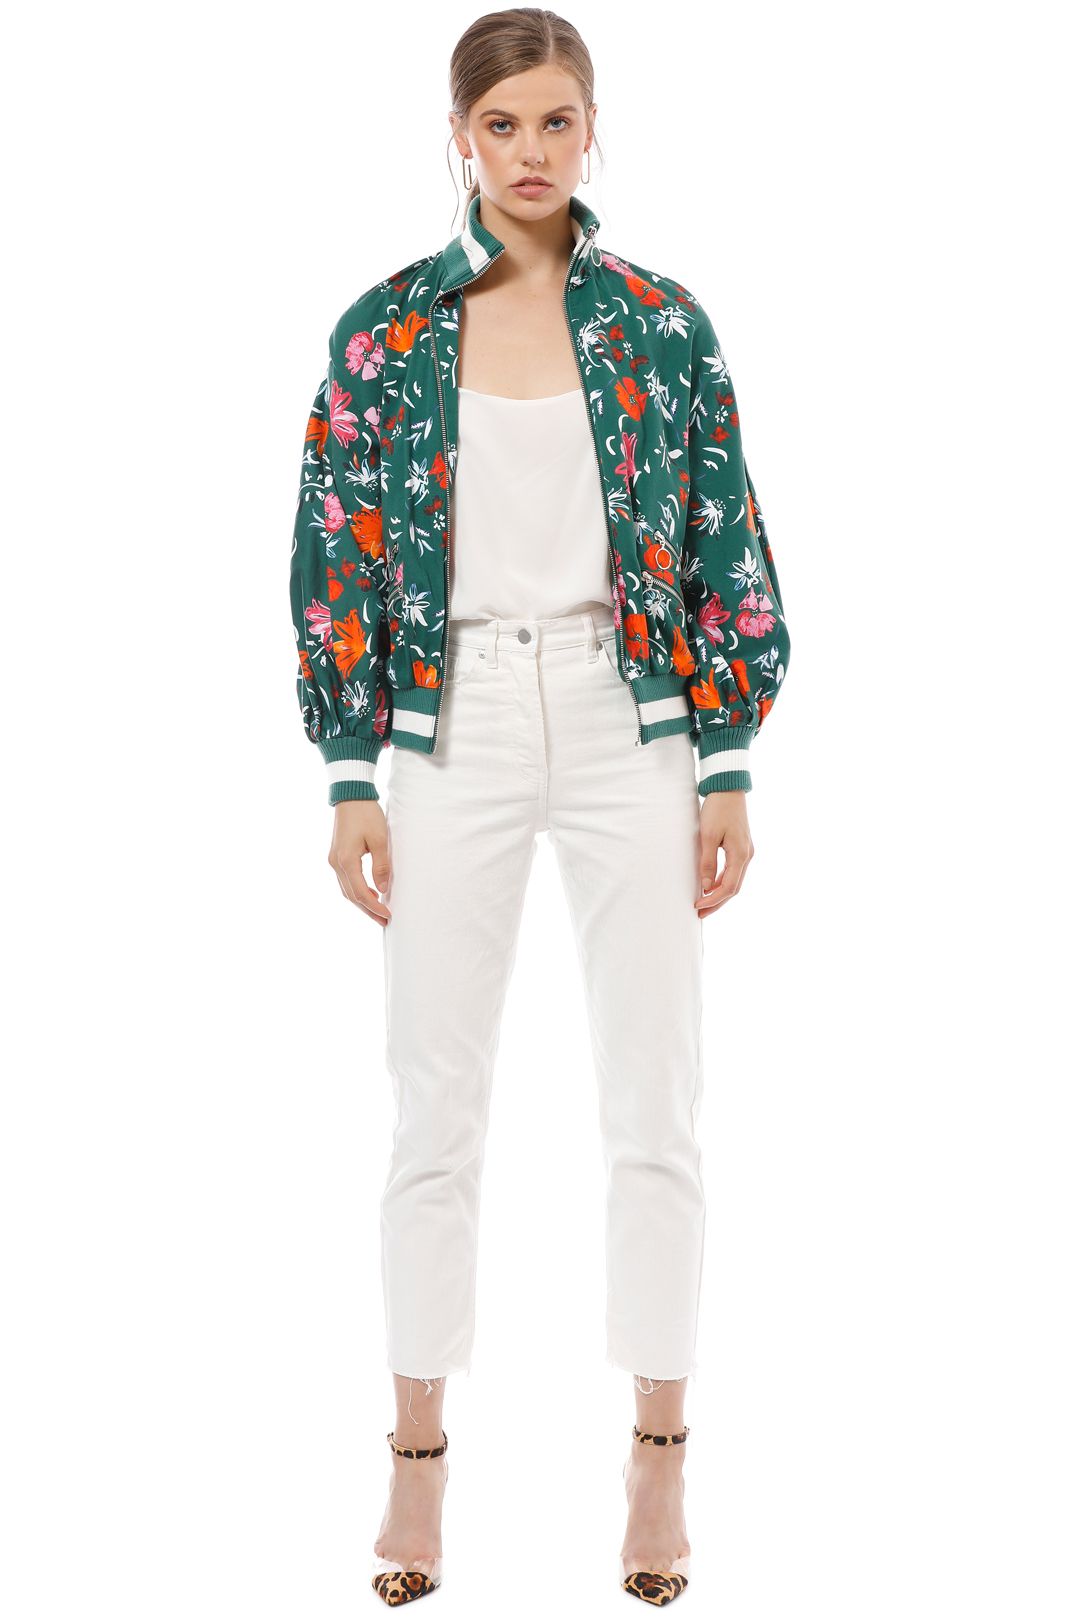 CMEO Collective - Elation Bomber - Green Floral - Front